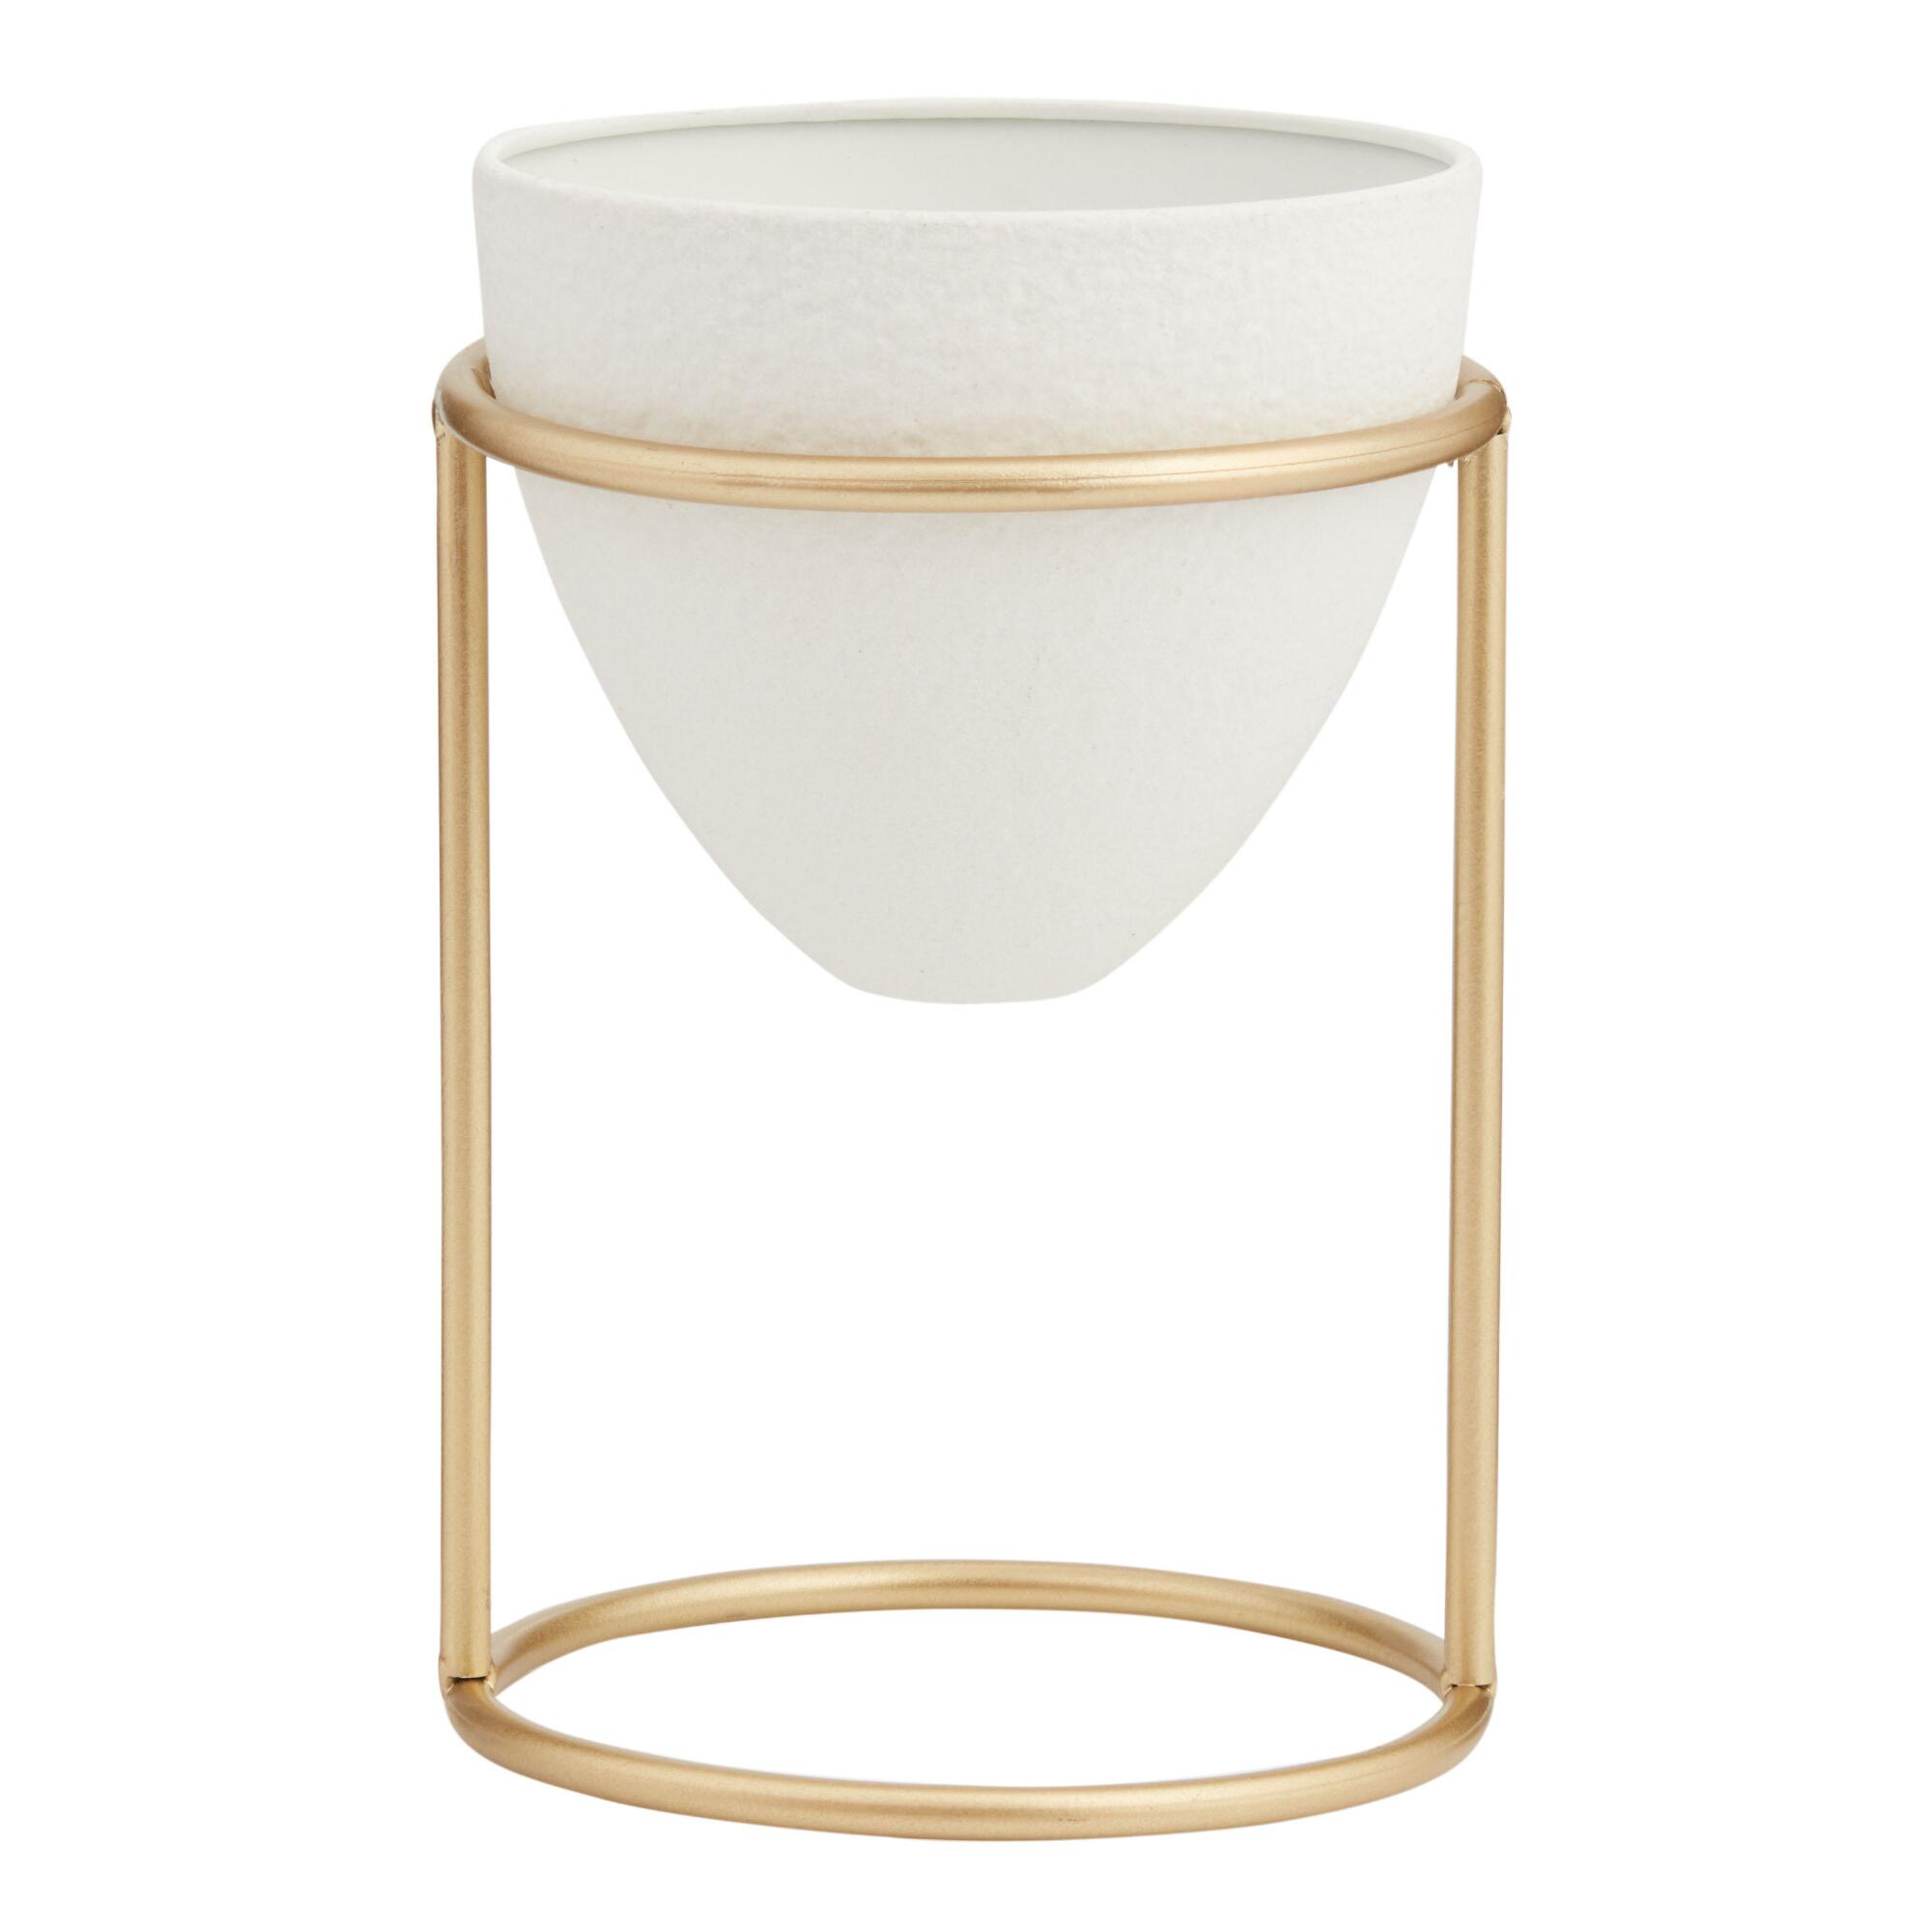 White Faux Cement Tapered Planter With Gold Stand: White/Gold - Metal by World Market